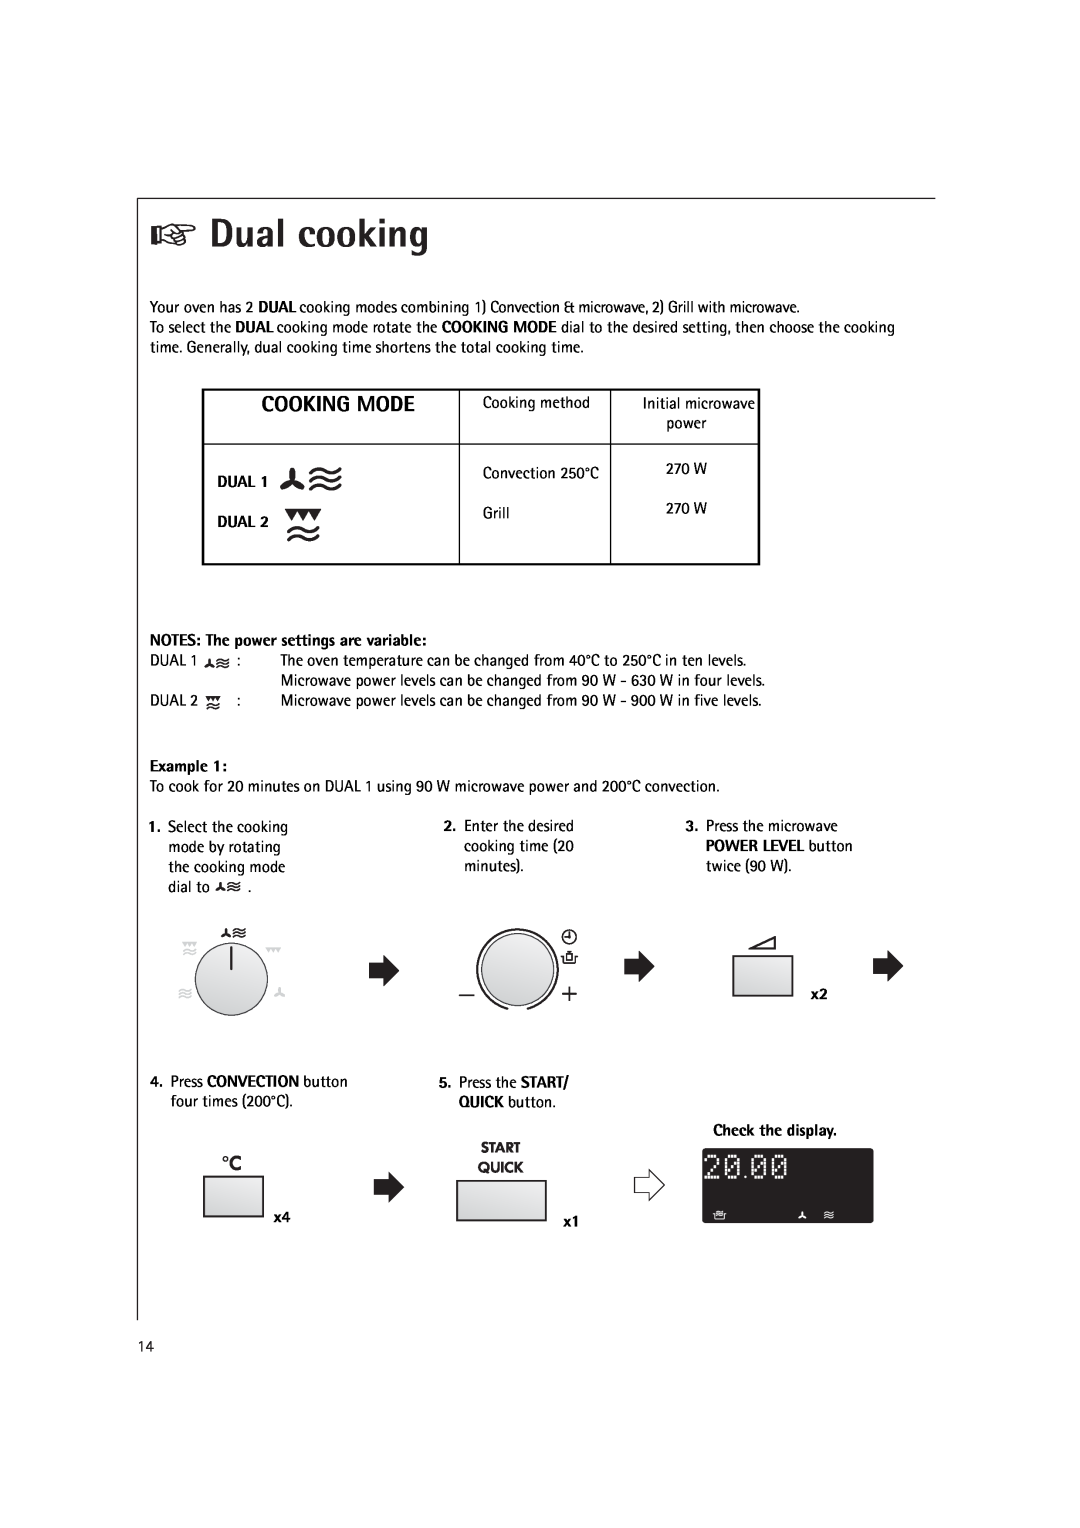 Electrolux MCC4060E Dual cooking, Cooking Mode, NOTES The power settings are variable, Example, Press CONVECTION button 